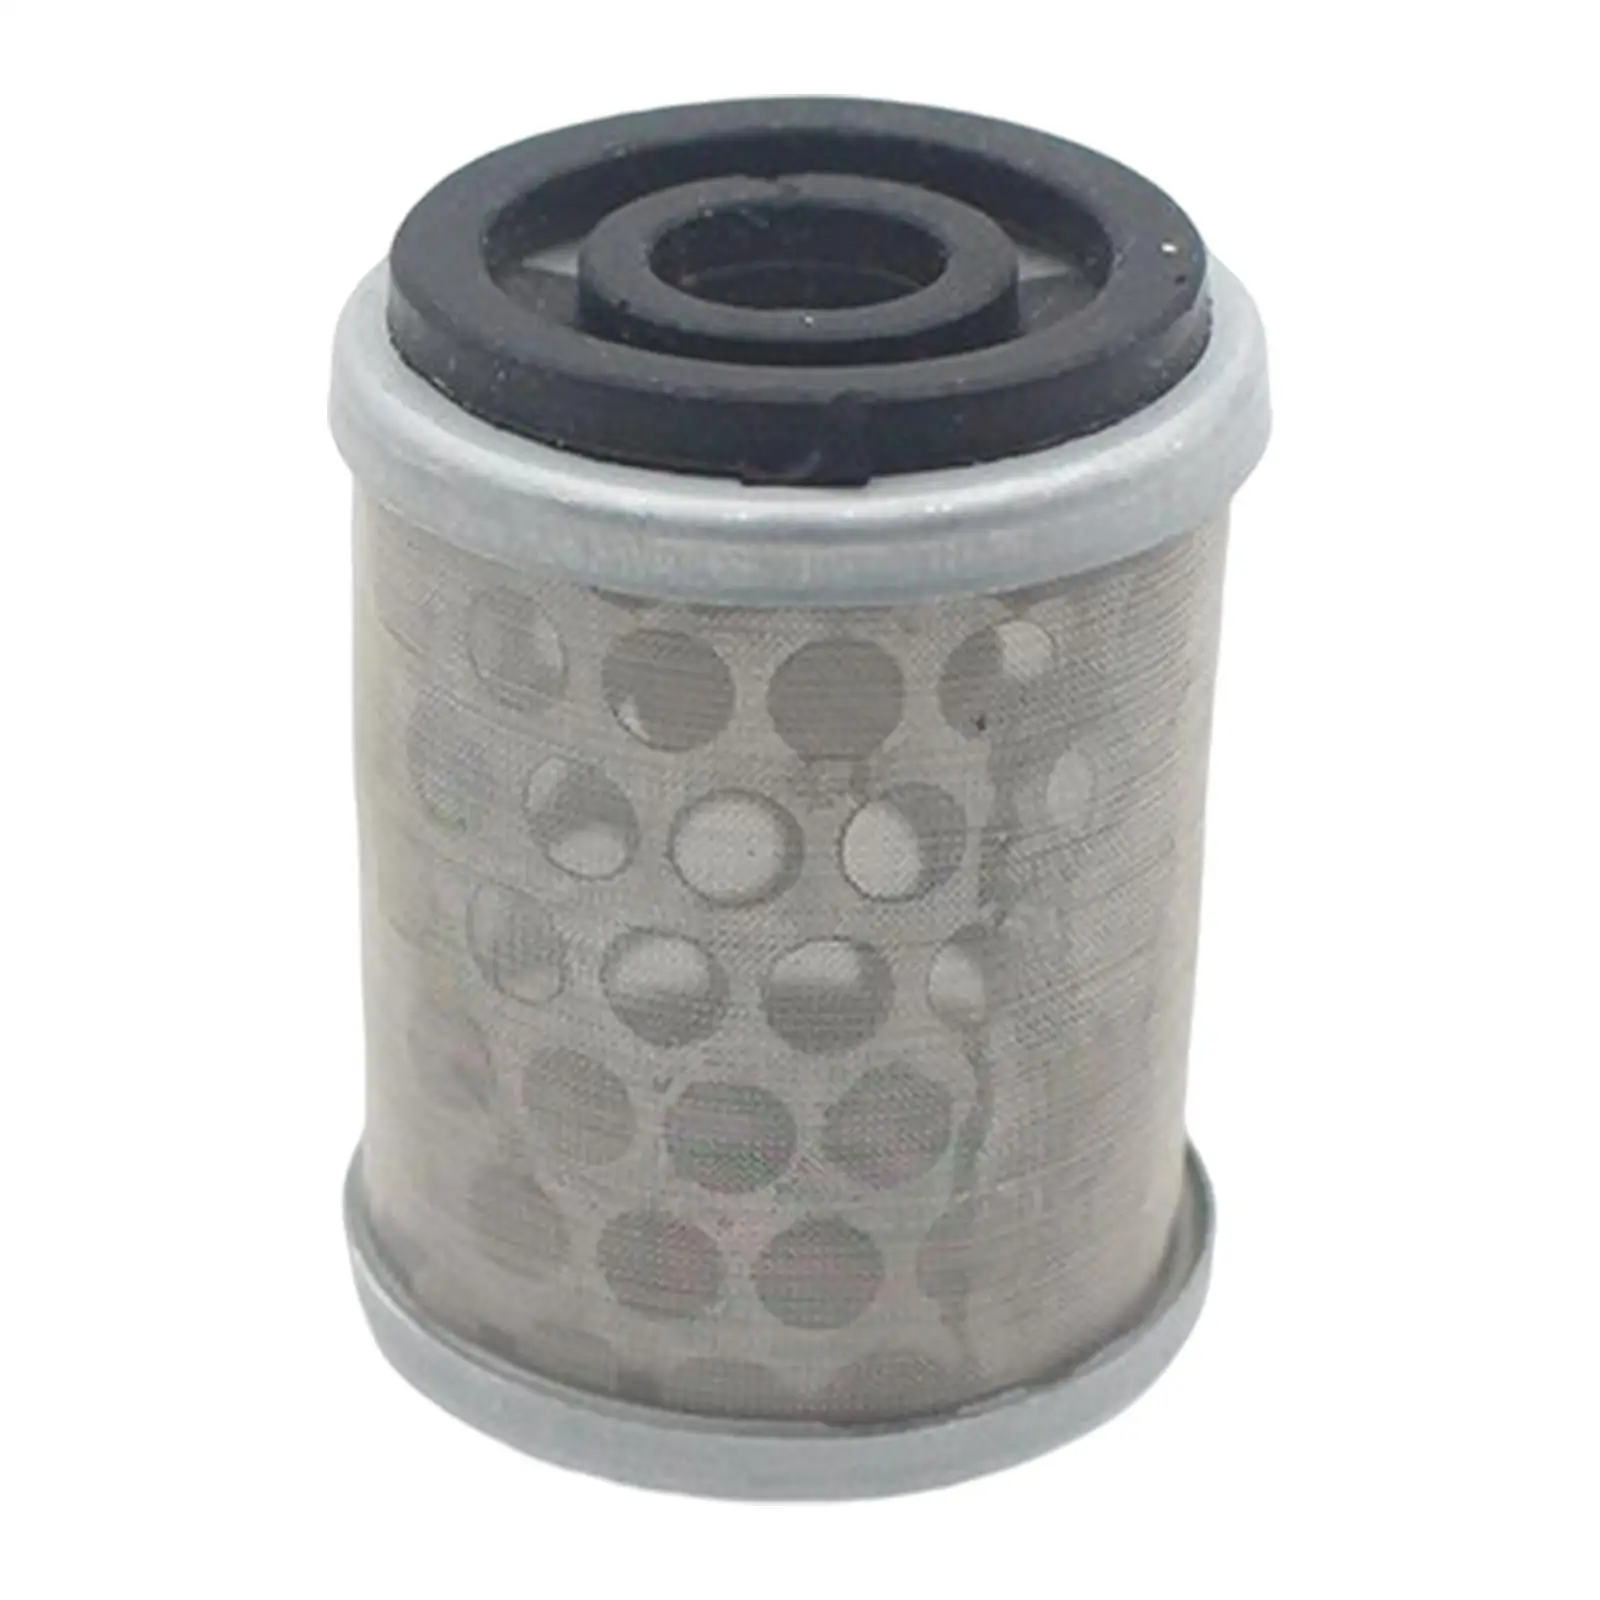 Motorcycle Oil Filter for Yamaha Czd300 Durable High Performance